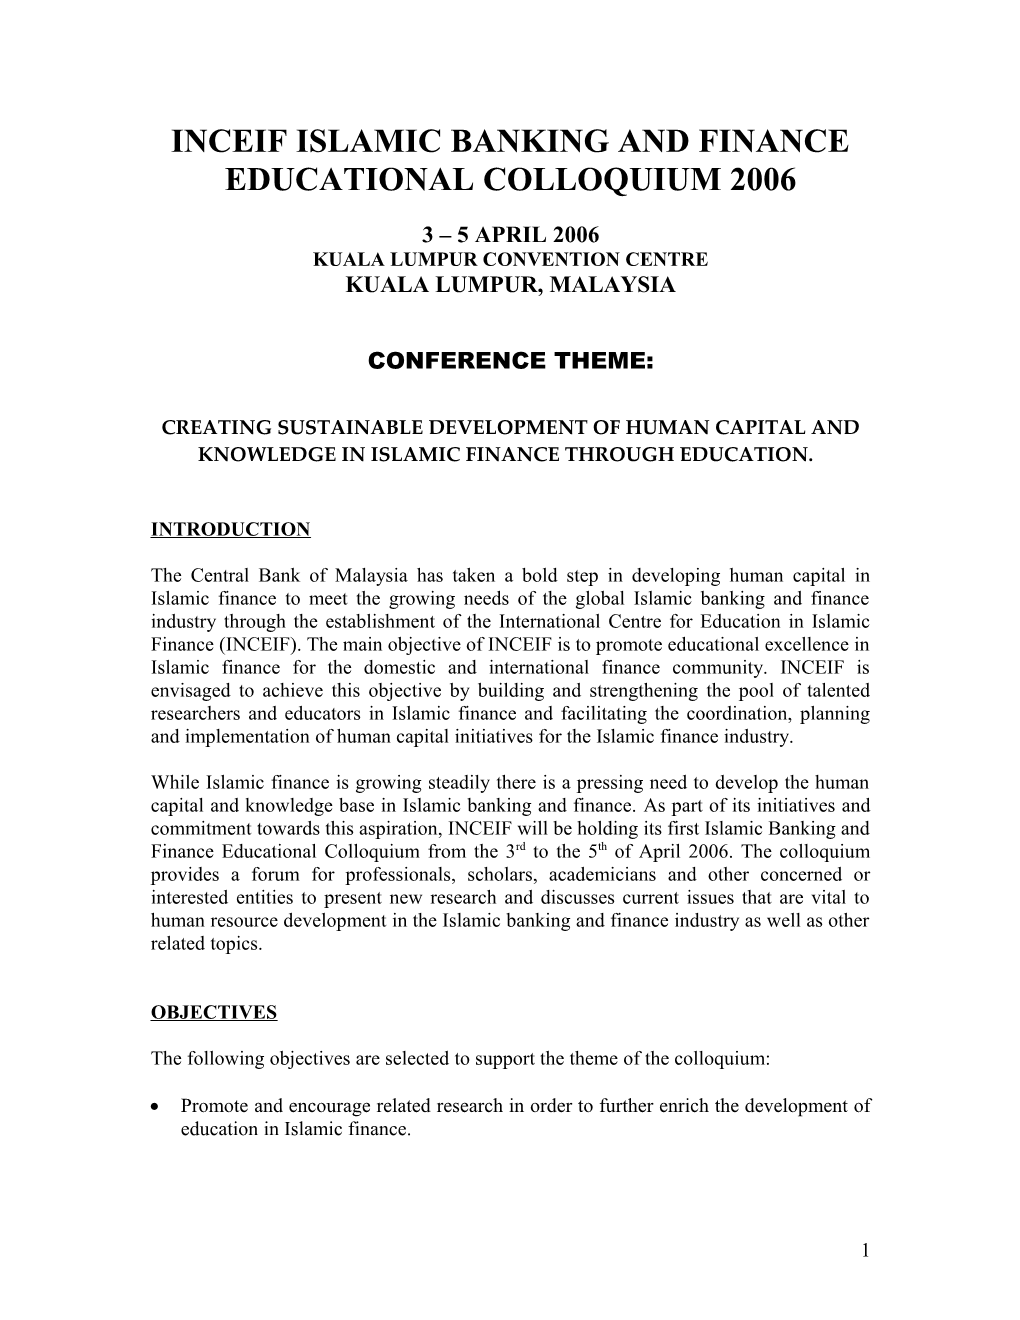 Inceif Islamic Banking and Finance Educational Colloquium 2006